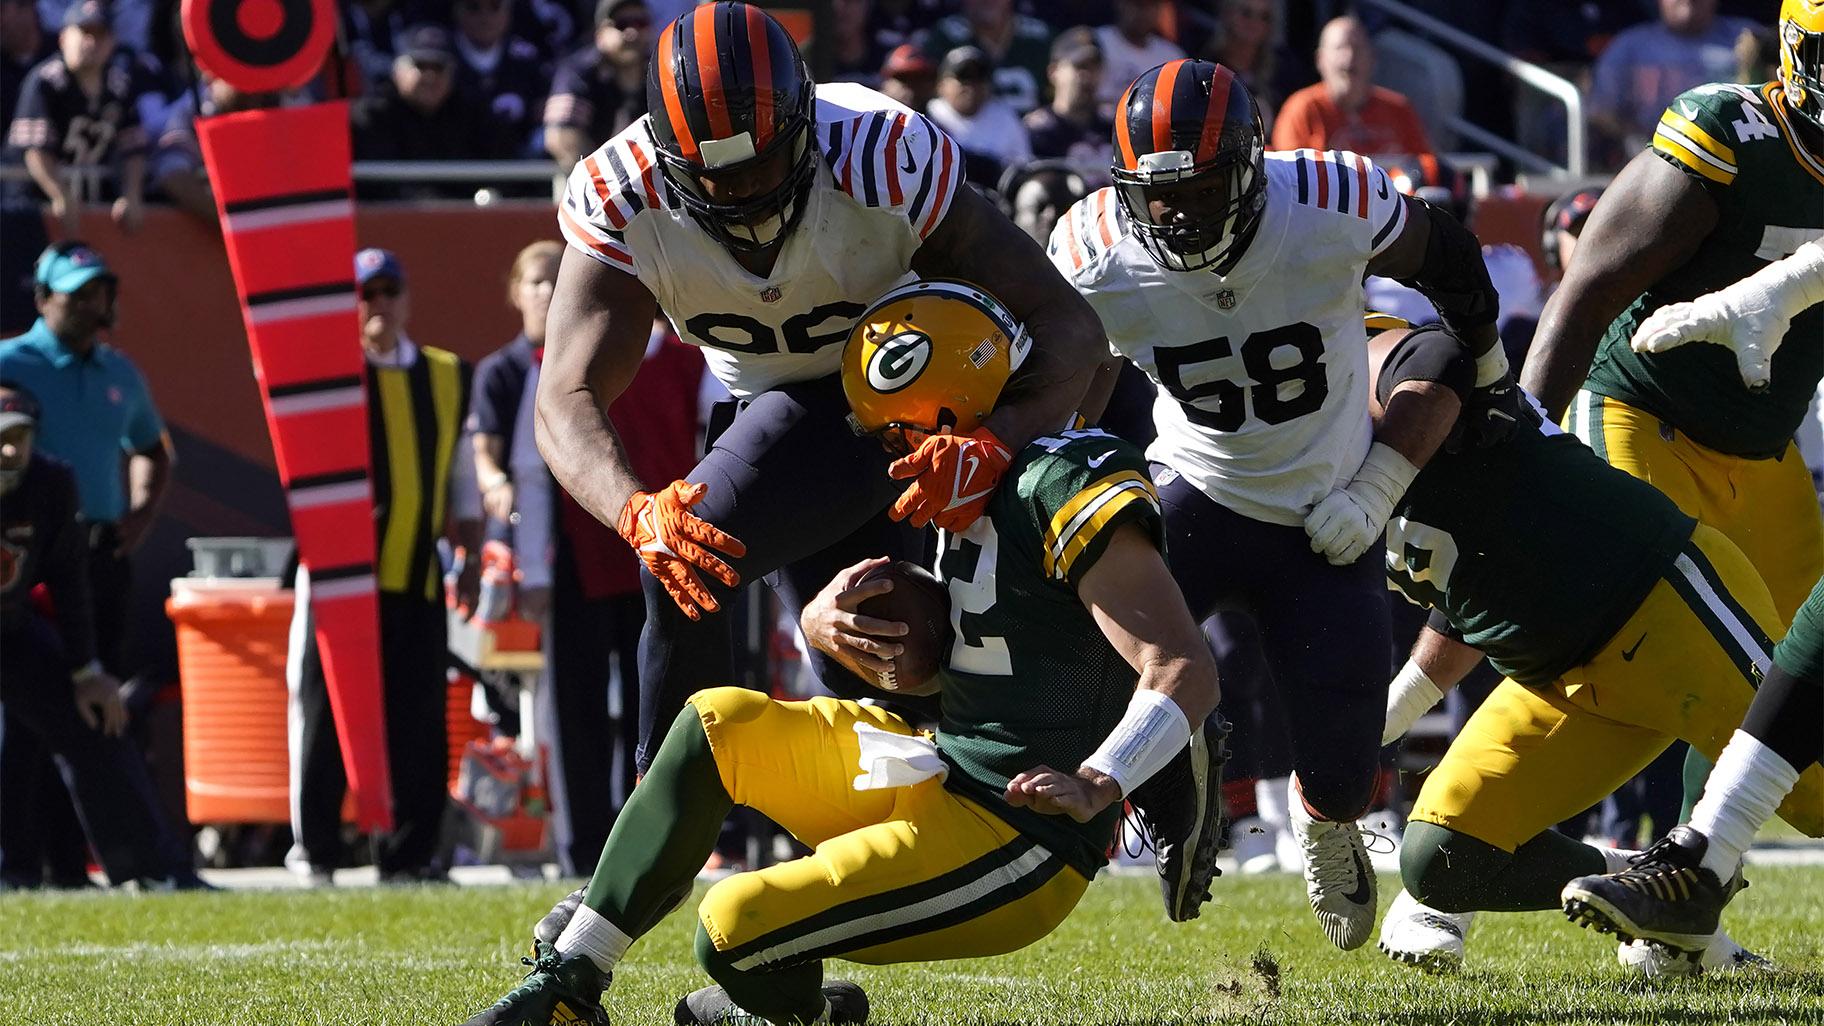 Chicago Bears vs. Green Bay Packers live stream: Watch week 1 of